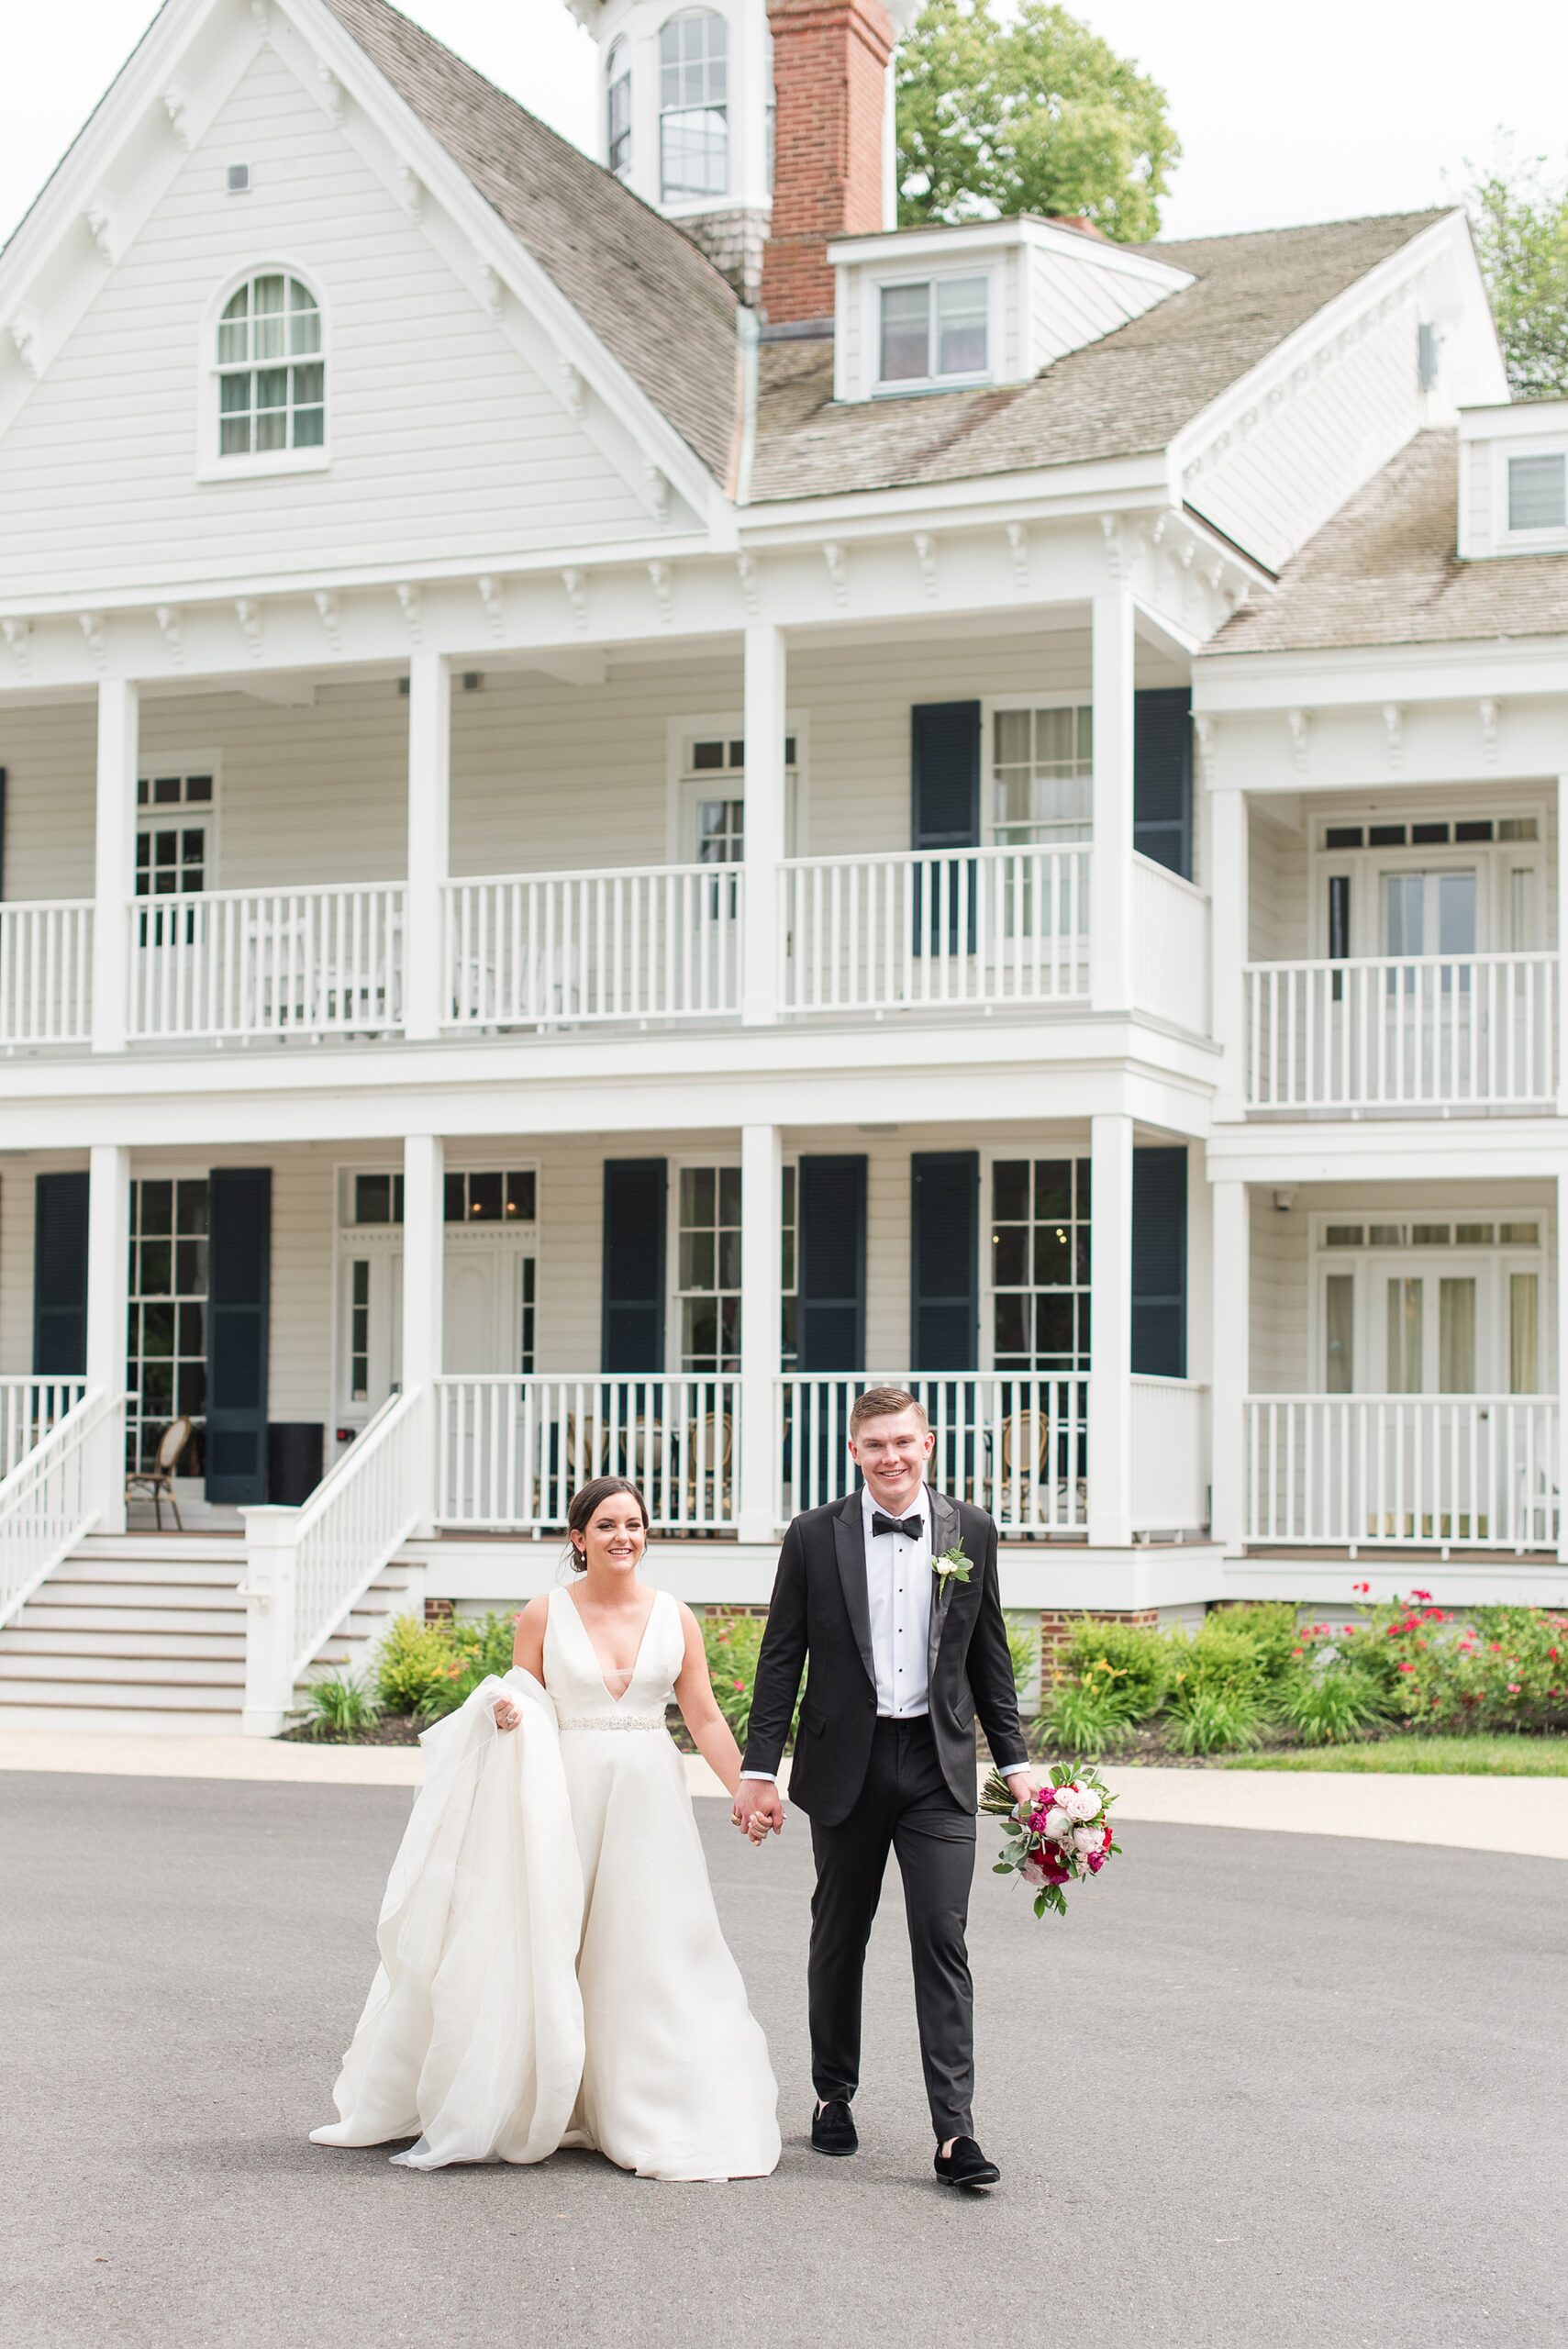 Newlyweds hold hands while walking through the driveway in front of a white building